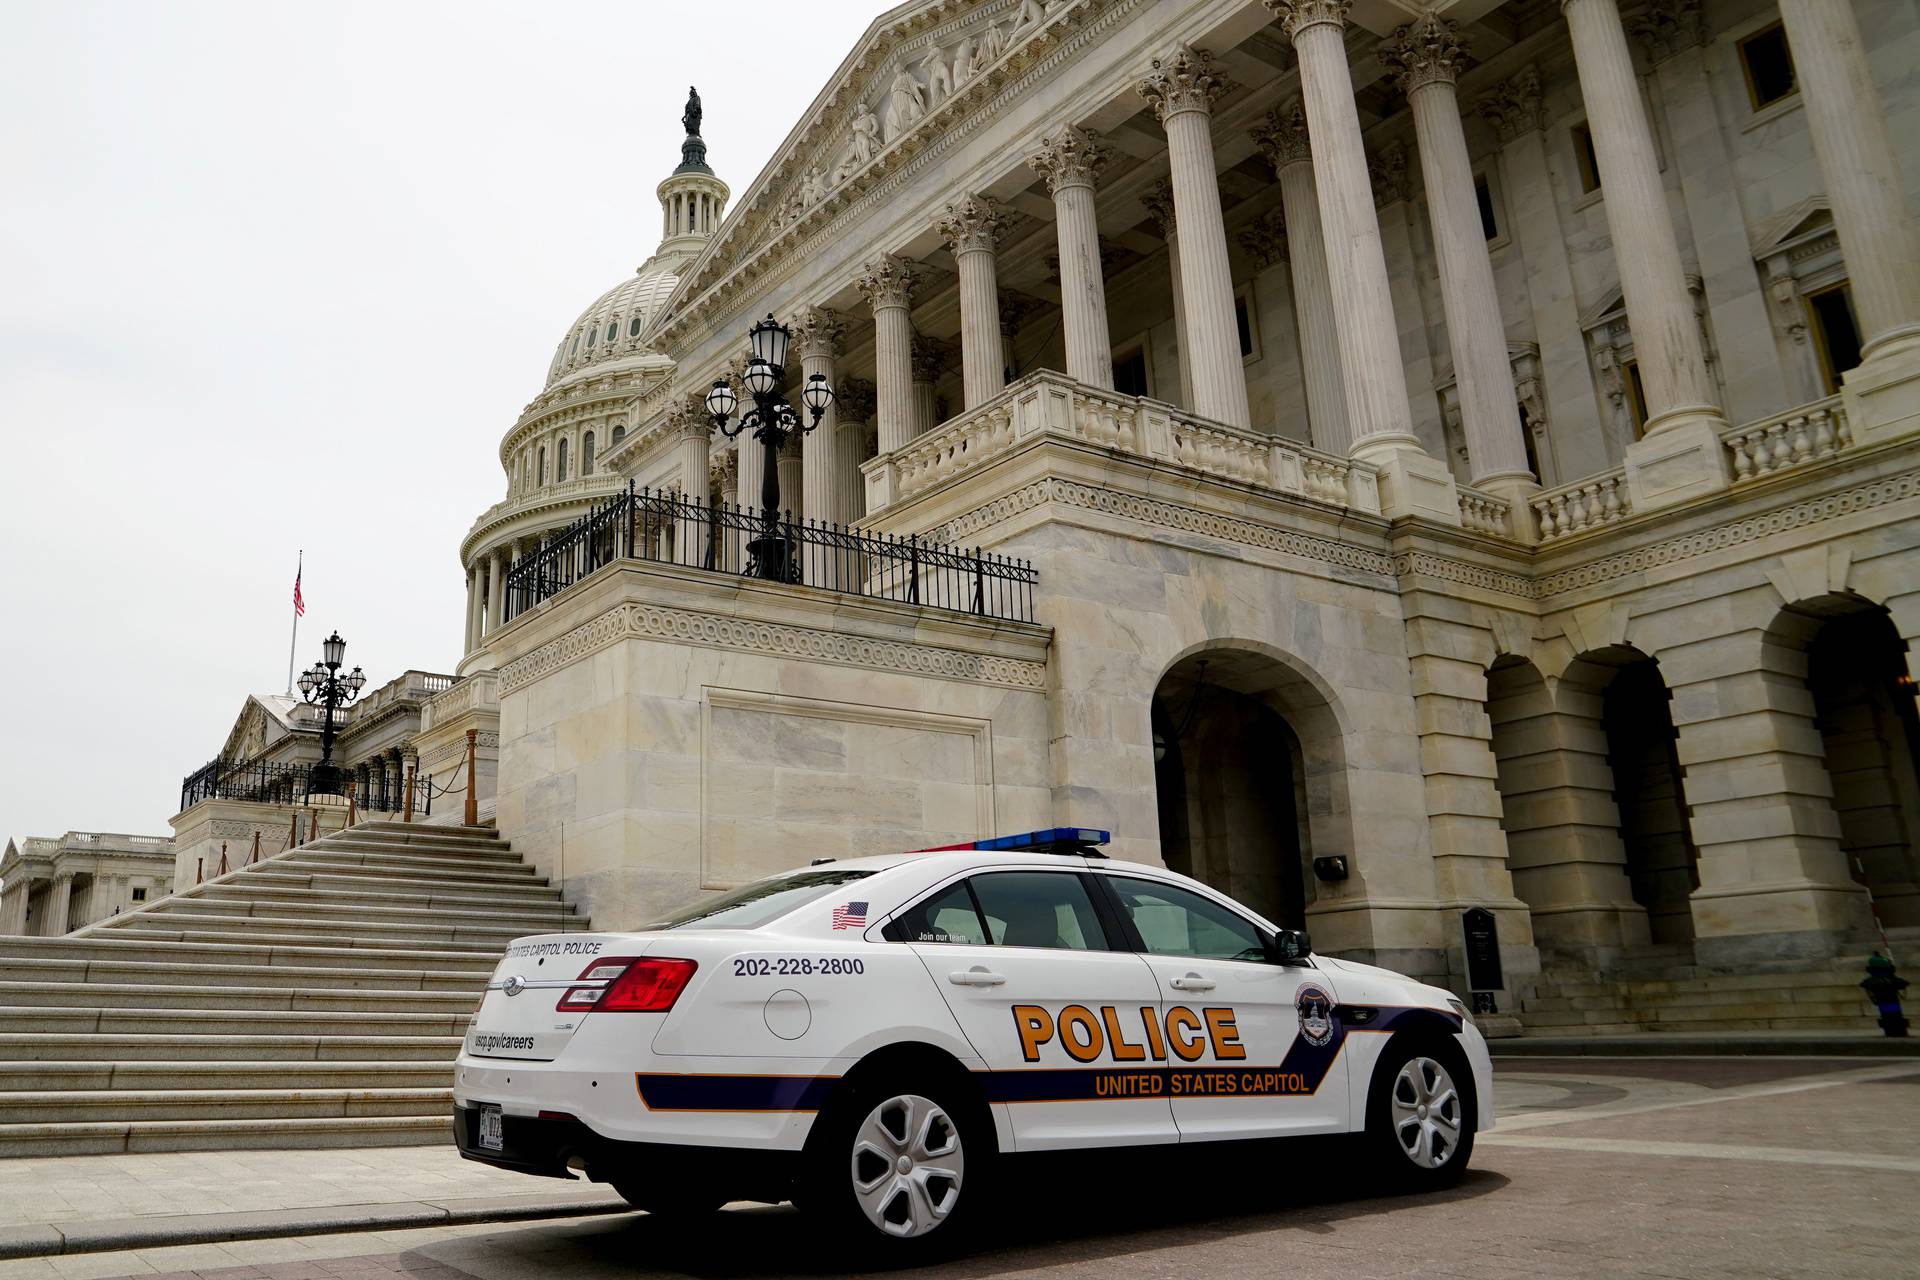 A Capitol Police vehicle parks at the U.S. Capitol in Washington